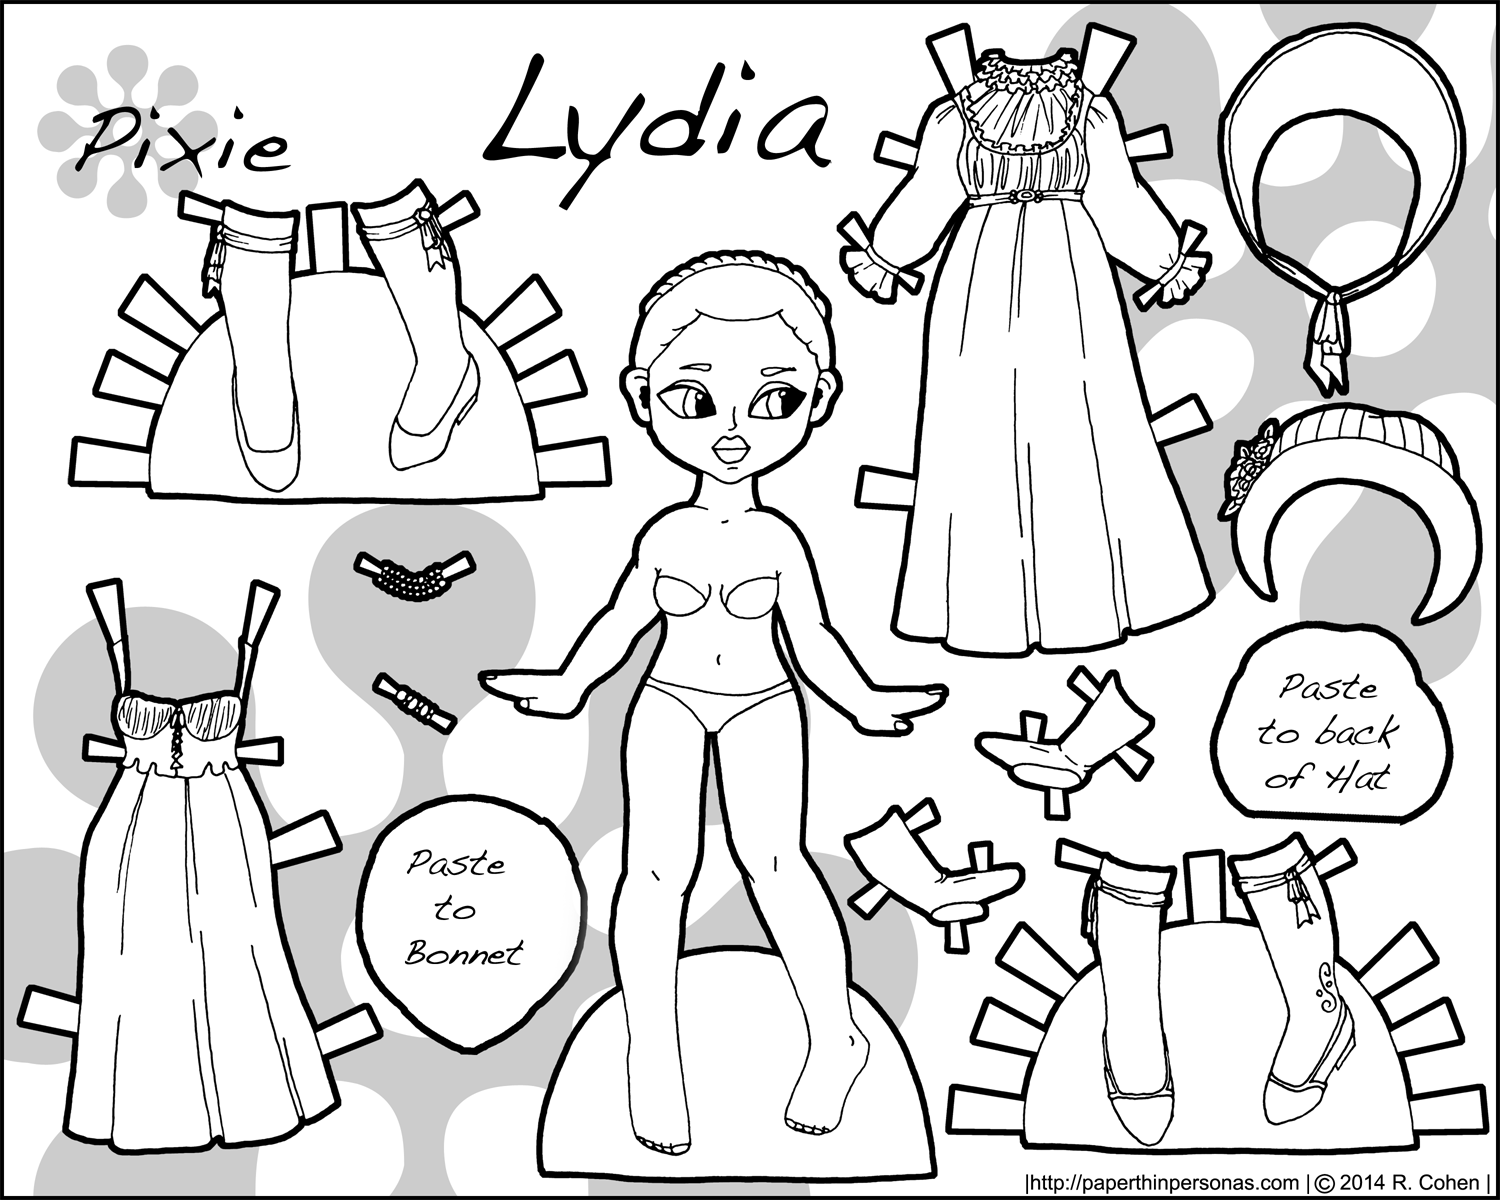 coloring pages of lydia in the bible